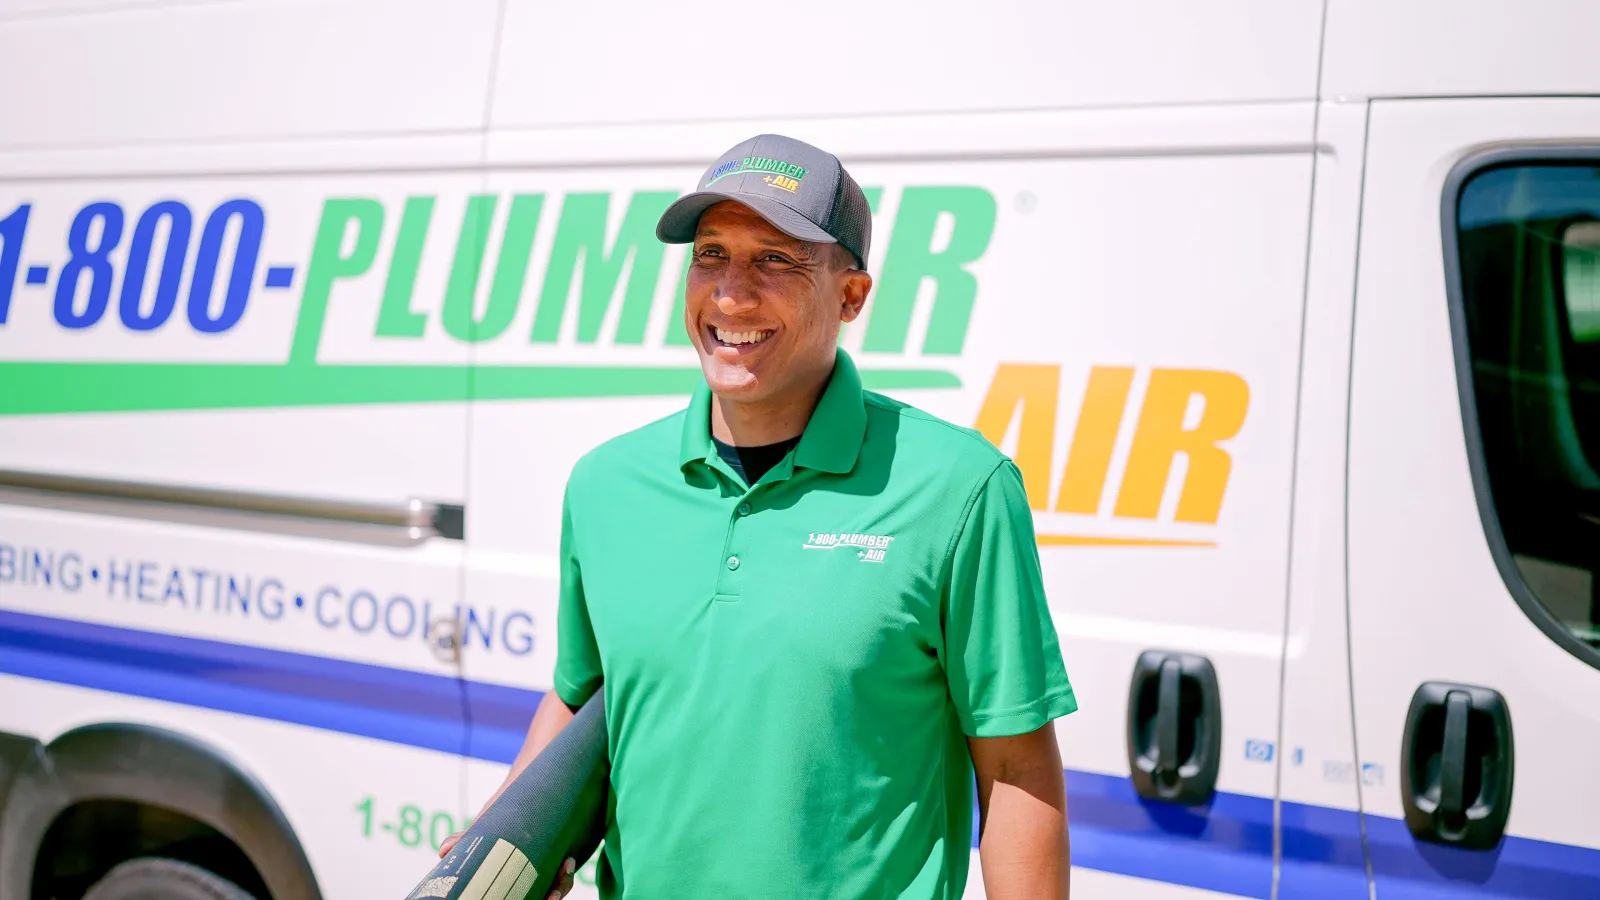 A 1-800-Plumber +Air of Pearland gas line technician